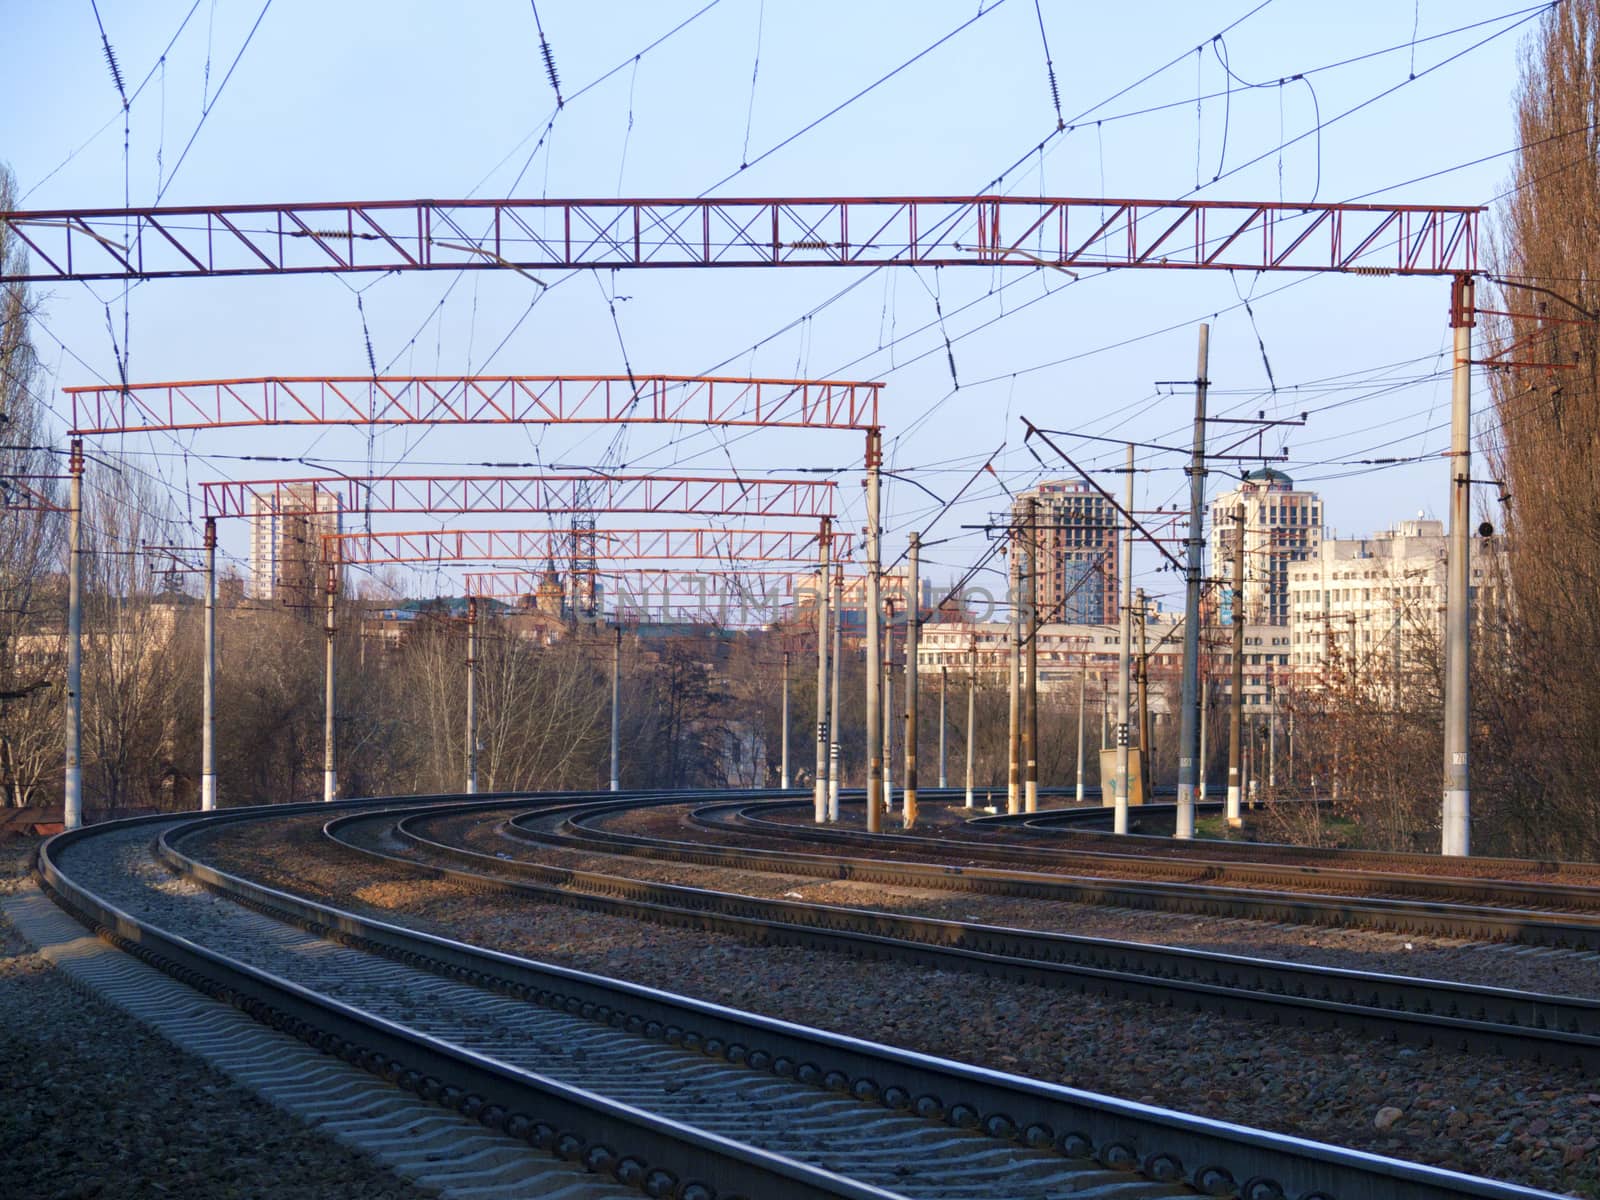 The prospect of many multi-lane railways for electric trains with overhead power lines in the early spring morning, high-rise buildings in the background.